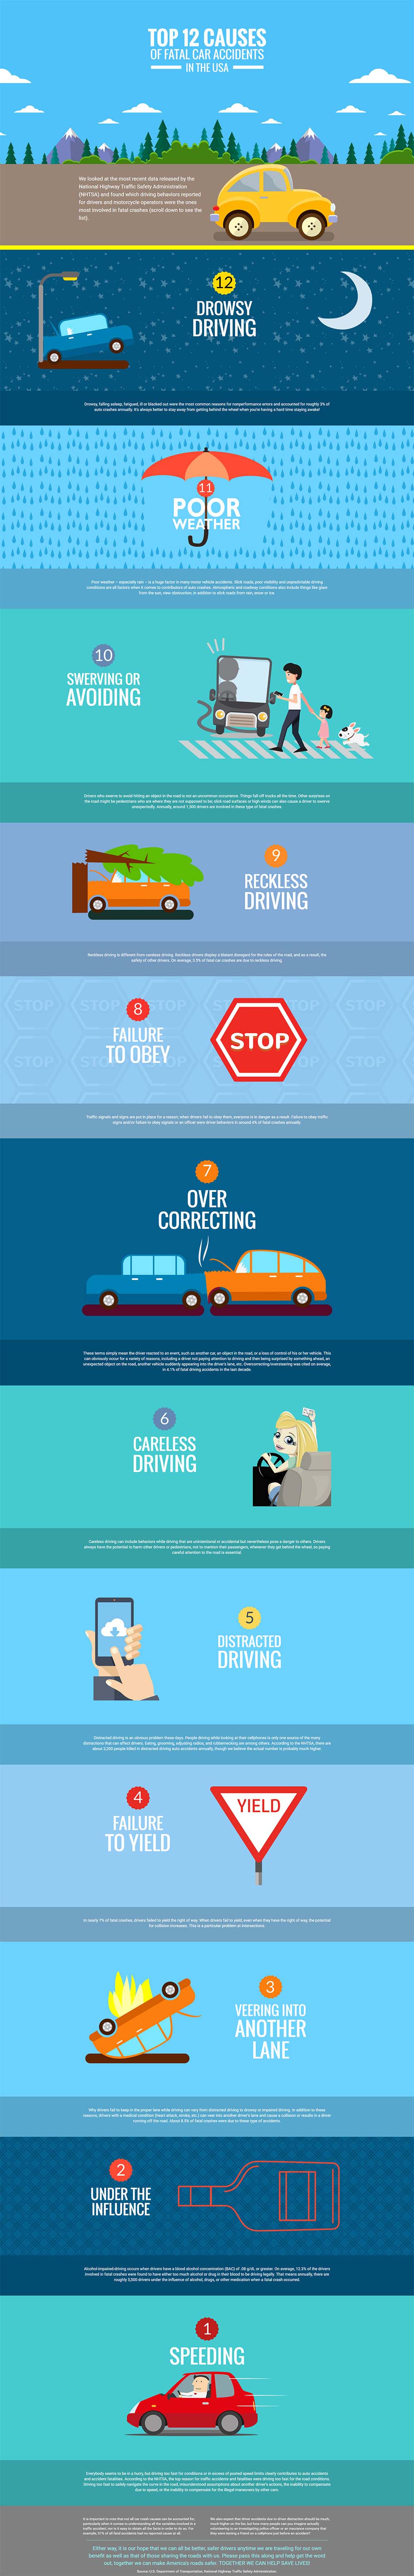 Top 15 Causes Of Car Accidents And How You Can Prevent Them